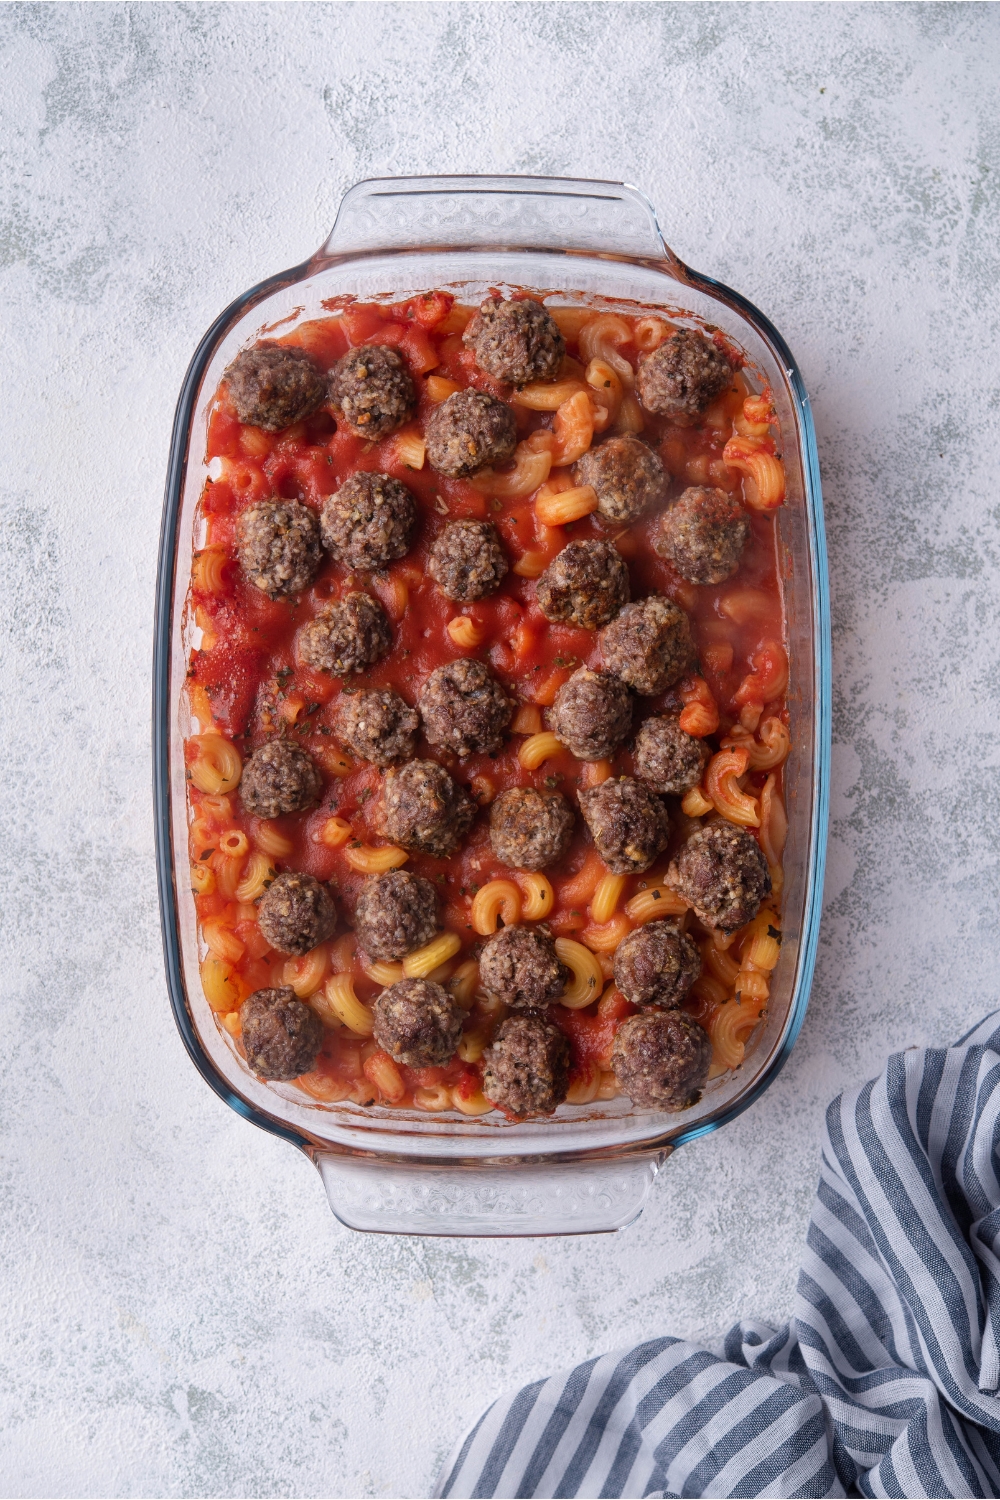 A clear baking dish filled with pasta, tomato sauce, and meatballs.